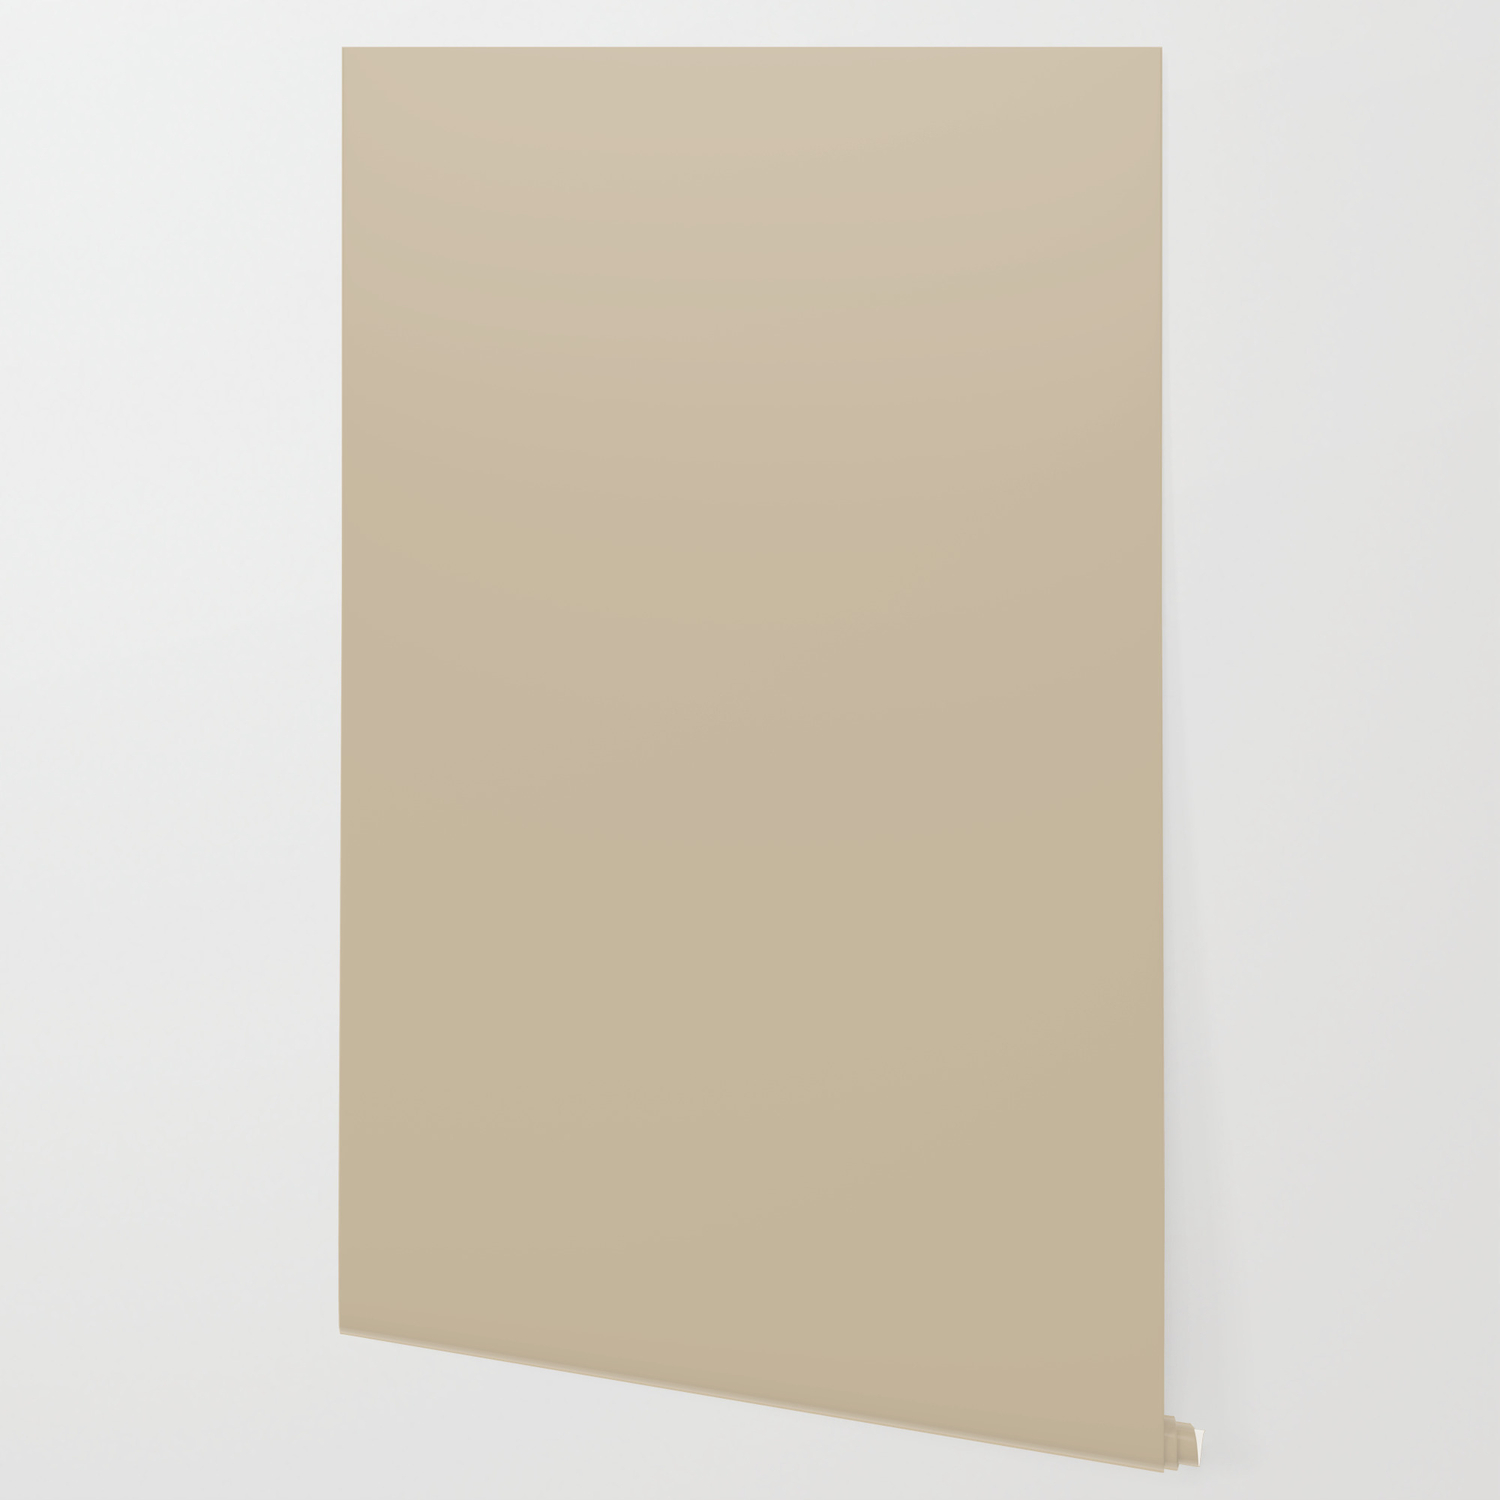 Neutral Beige Tan Light Brown Solid Color Parable To Sherwin Williams Ramie Sw 6156 Wallpaper By Simplysolids Society6,What Is A Dogs Normal Temperature